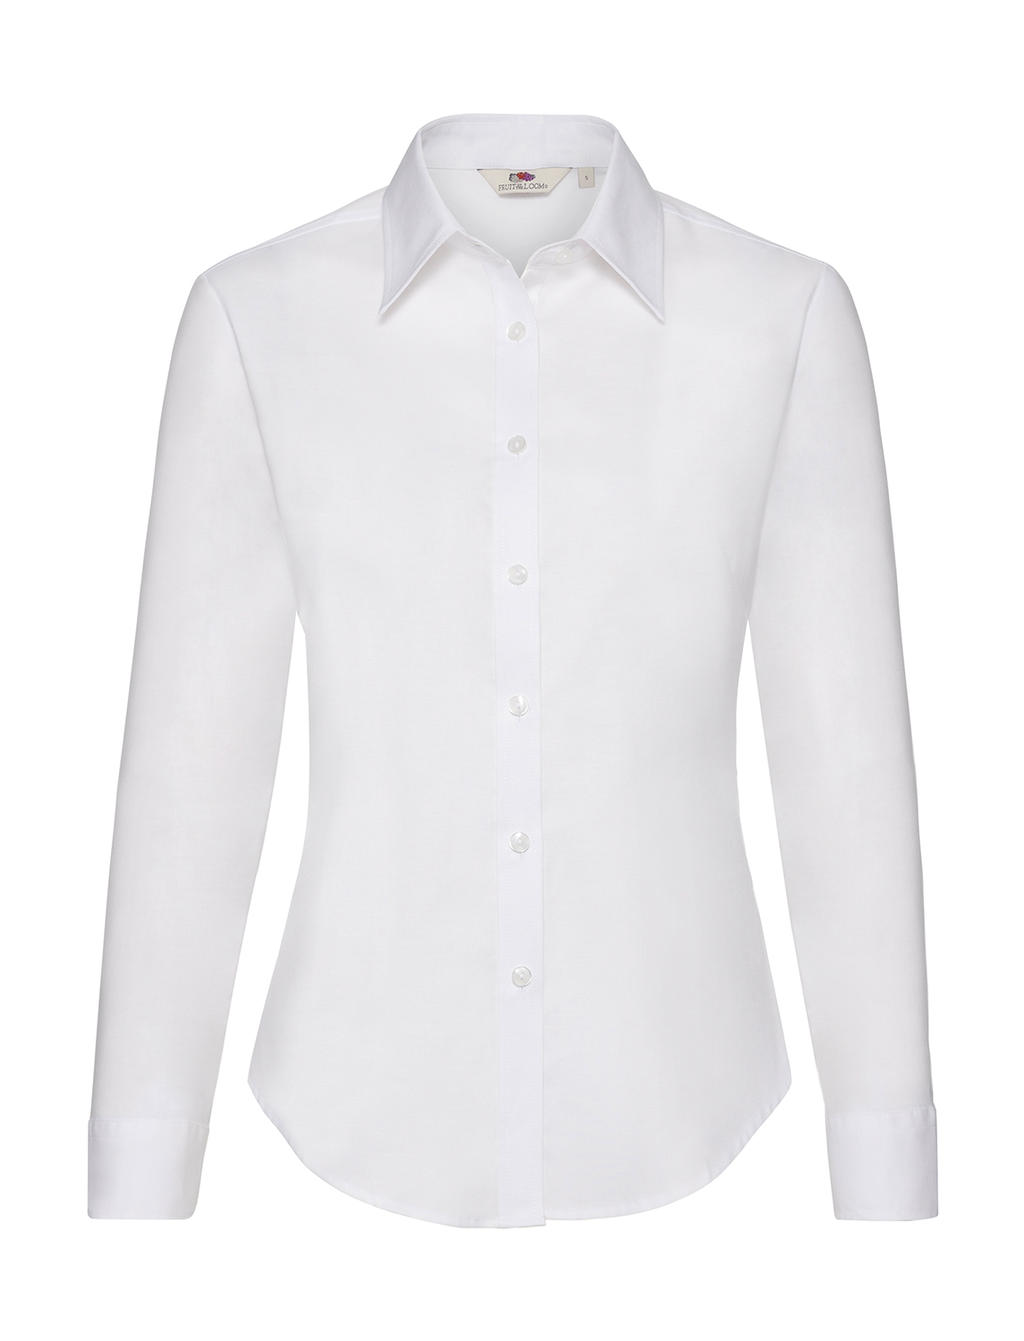  Ladies Oxford Shirt LS in Farbe White